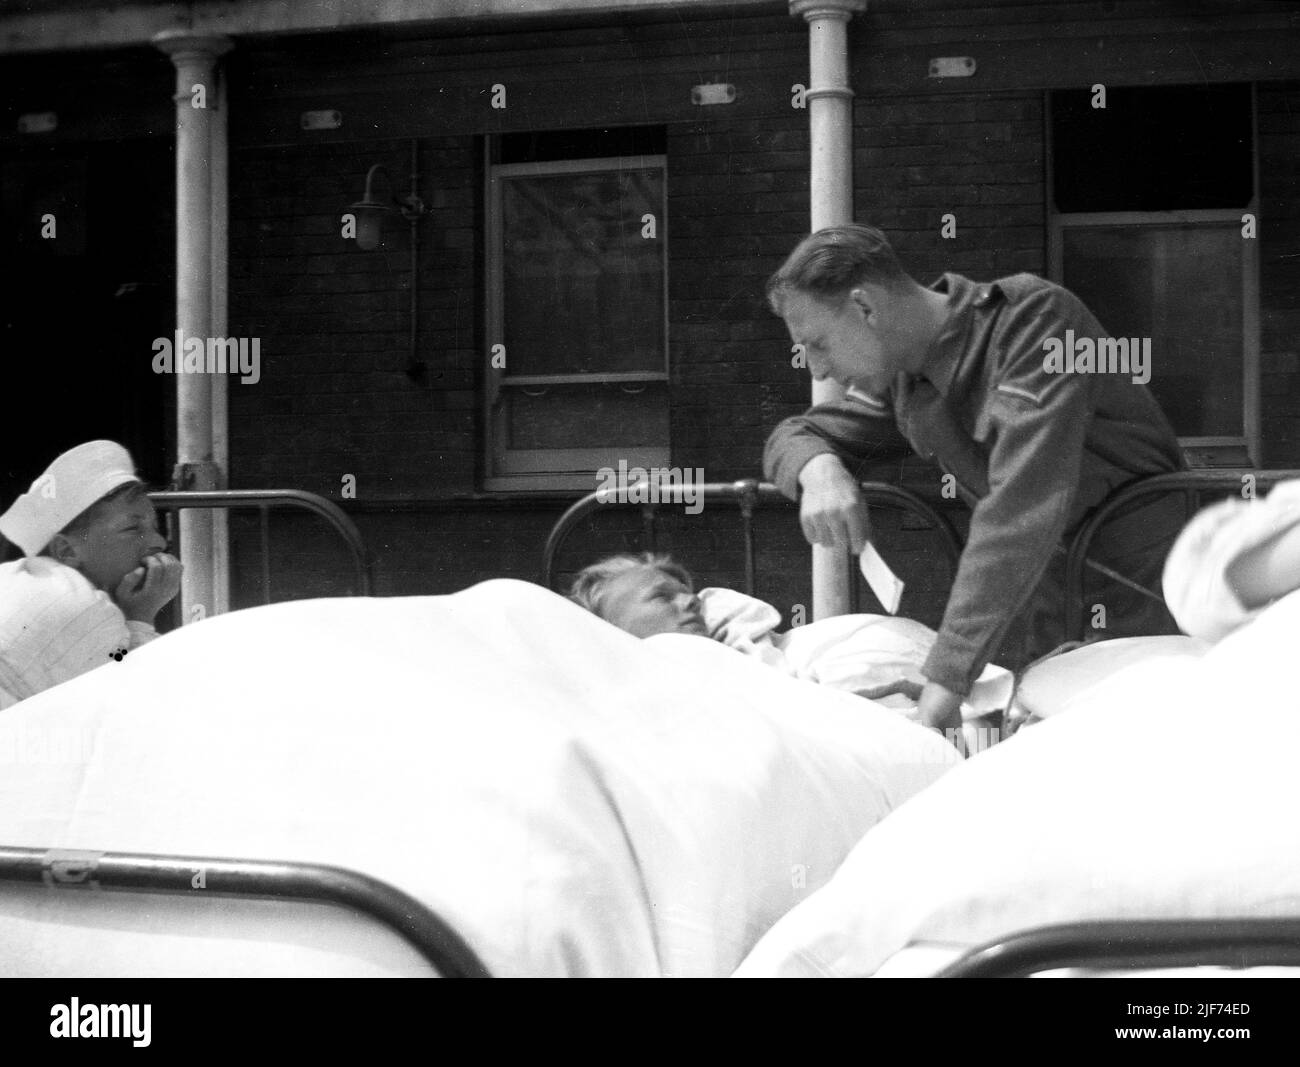 1941, historical, WW2 and a uniformed British Army soldier, a Lance Corporal, talking to a young boy lying in a metal hospital bed outside The Queen Mary's Hospital for Children, Carshalton, England, UK. Built in 1908 as the Southern Hospital, it became a children's infirmary in 1909 and renamed after a visit by Queen Mary in 1915. It was the most heavily bombed hospital in the greater London area, with the first attack in 1940. The new threats posed by the VI and V2 rockets, saw total evacuation take place in July 1944 with children taken to other locations in England and Wales. Stock Photo